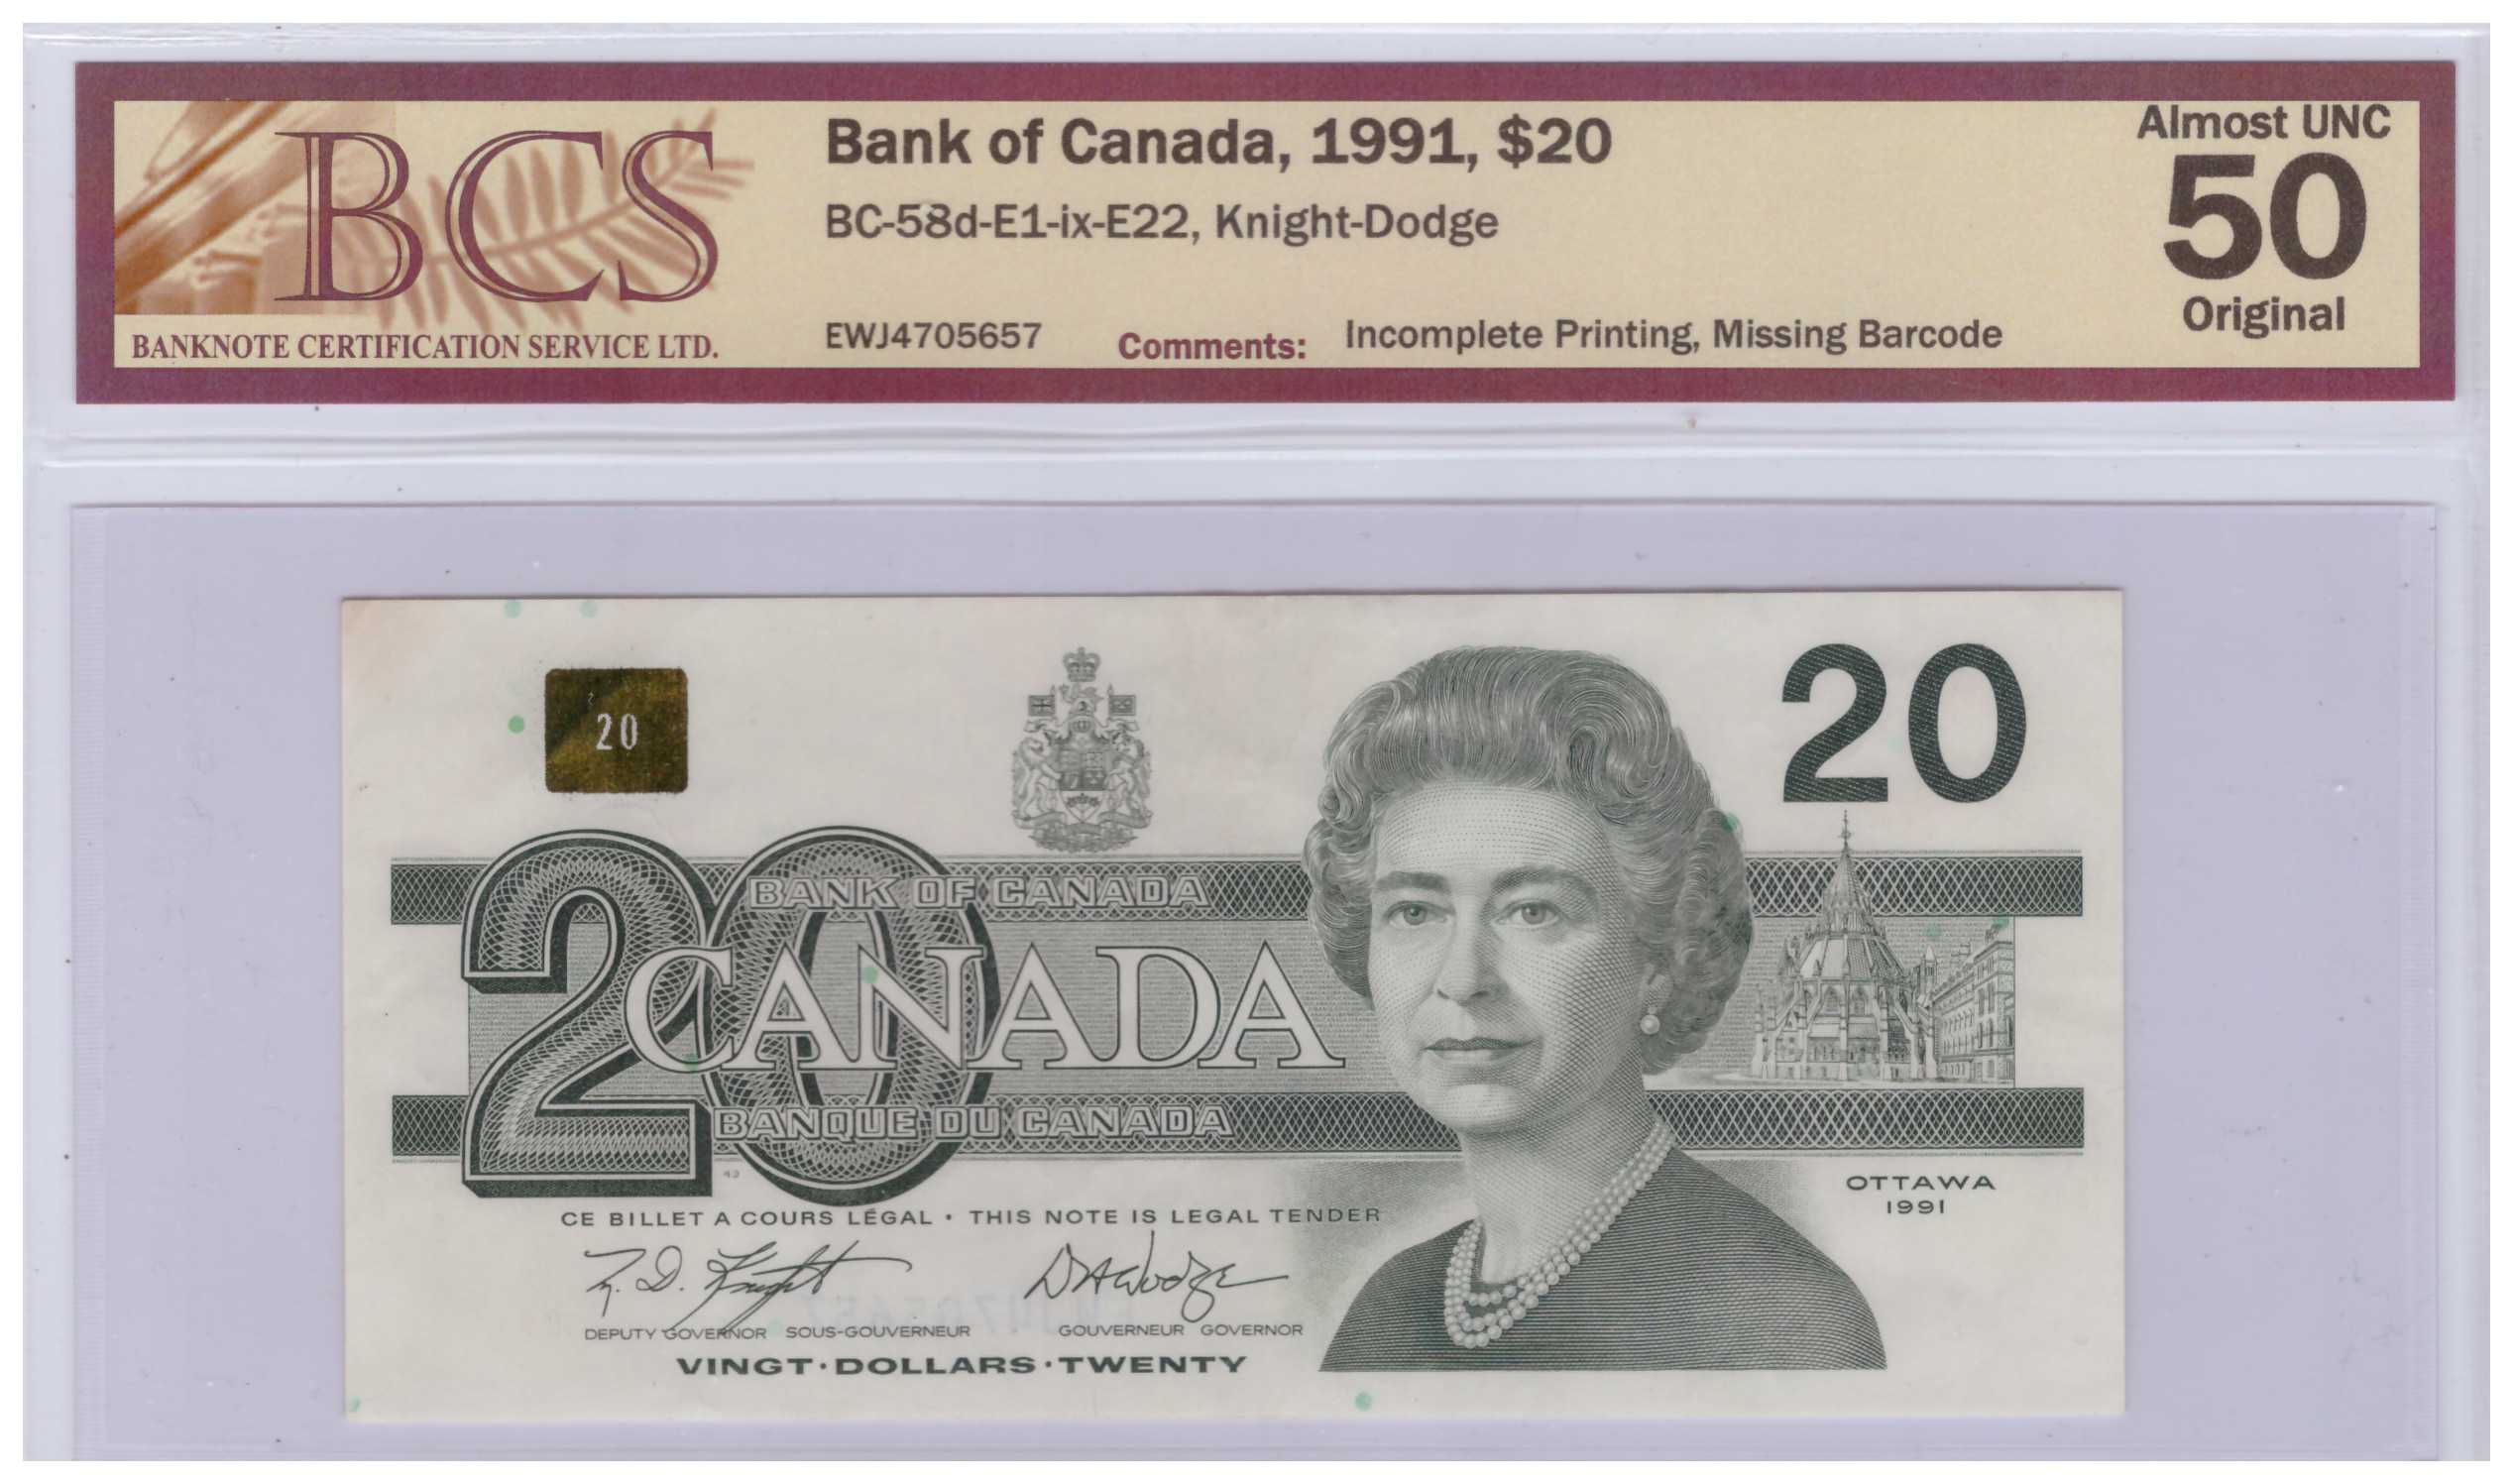 $20 - 1991 EWJ4705657 - Error 100% back missing - Missing background printing on front - Missing Bar codes - Front pic - BCS Almost Unc 50.jpeg